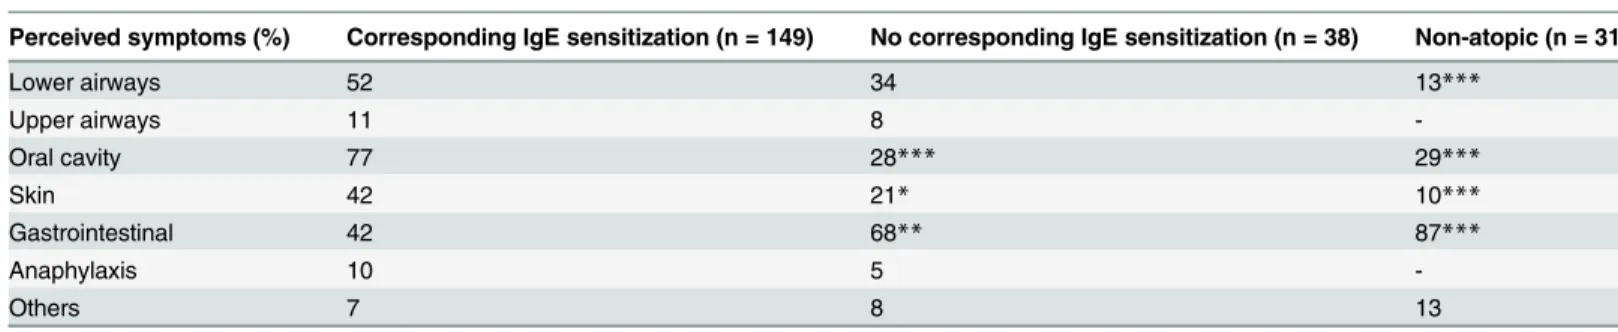 Table 3. Perceived symptoms associated with food consumption (%) among asthmatics.